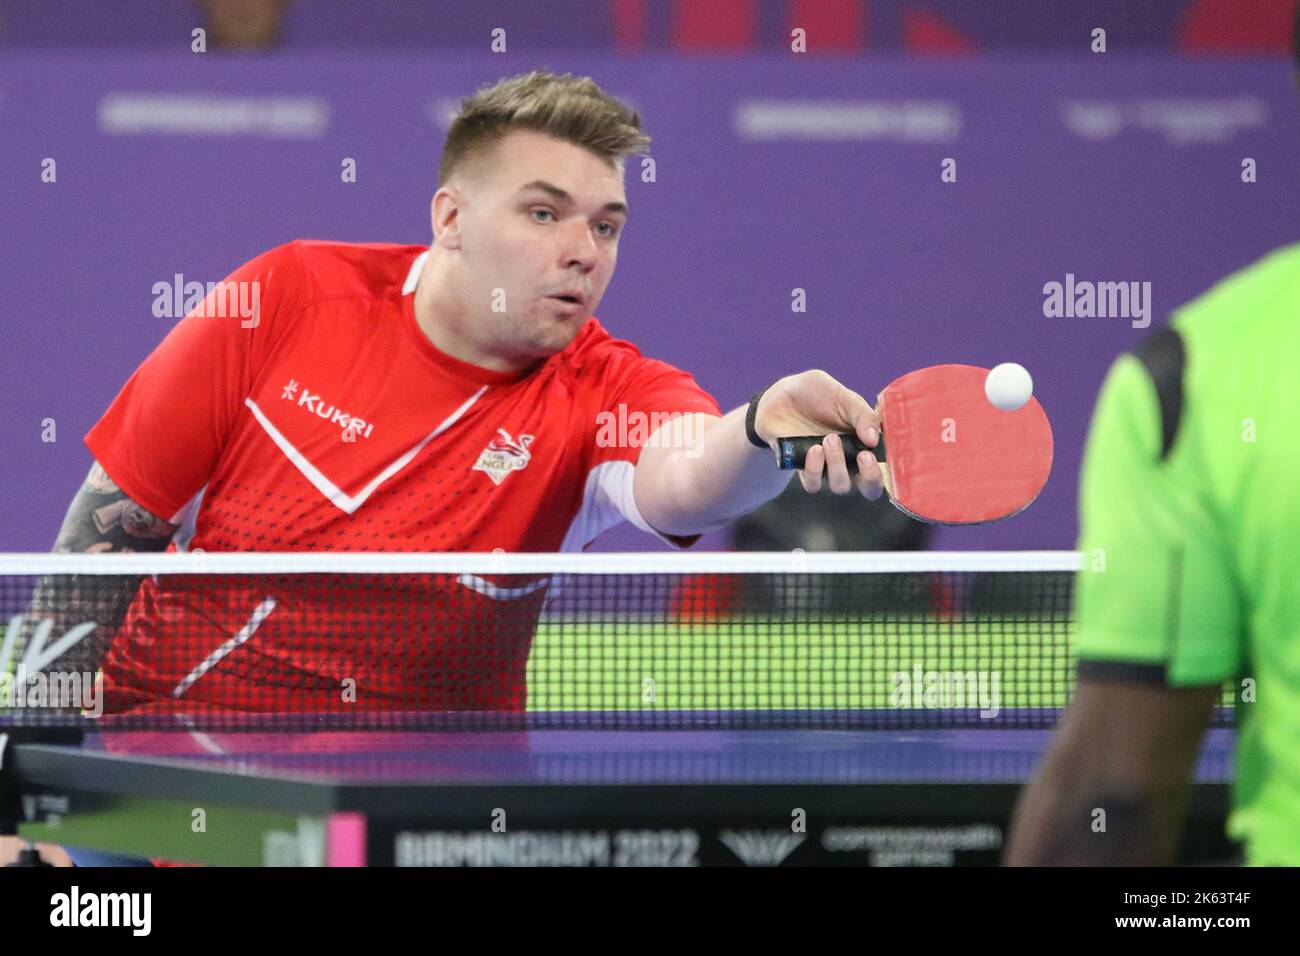 Jack HUNTER-SPIVEY of England (pictured) in the Men's Singles Classes 3-5 - Semi-Final table tennis v Isau OGUNKUNLE of Nigeria at the 2022 Commonwealth games in the NEC, Birmingham. Stock Photo